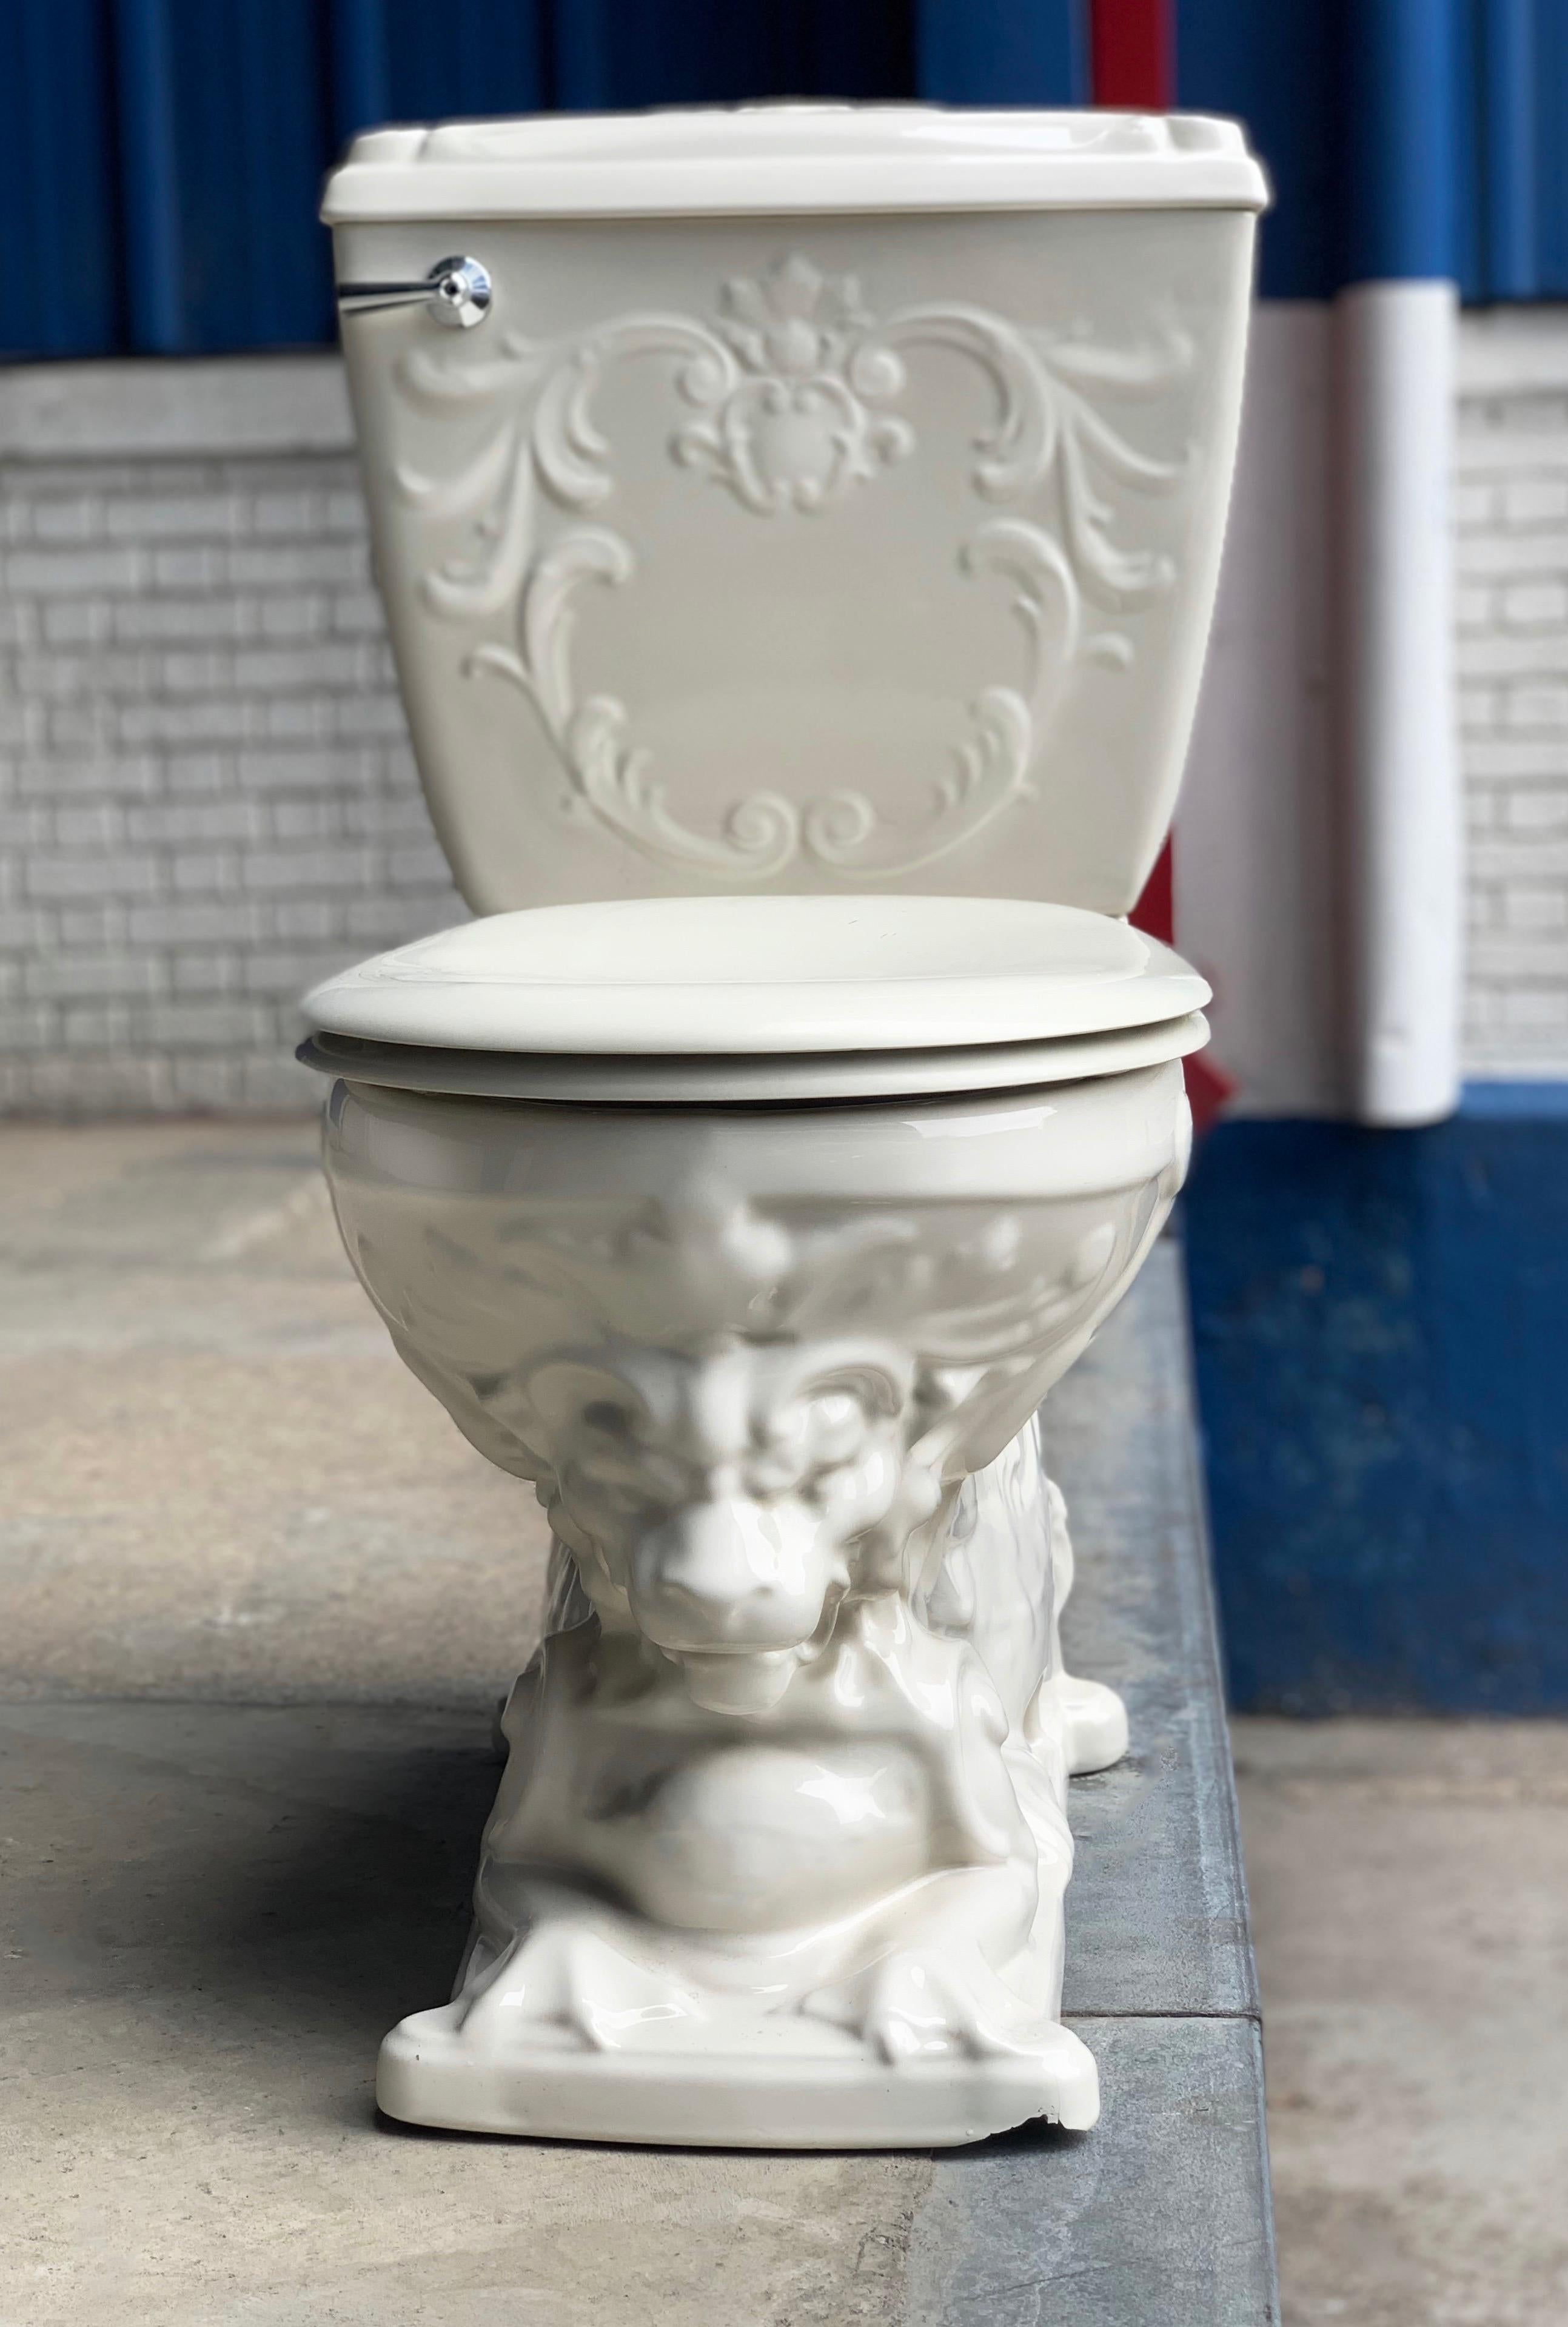 Vintage Laufen Nautilus regal lion porcelain throne toilet water closet, cistern
Nautilus II toilet and cistern
Includes porcelain lion toilet, ceramic cistern with Lid
Please note this is the rare version with the cistern handle on the front